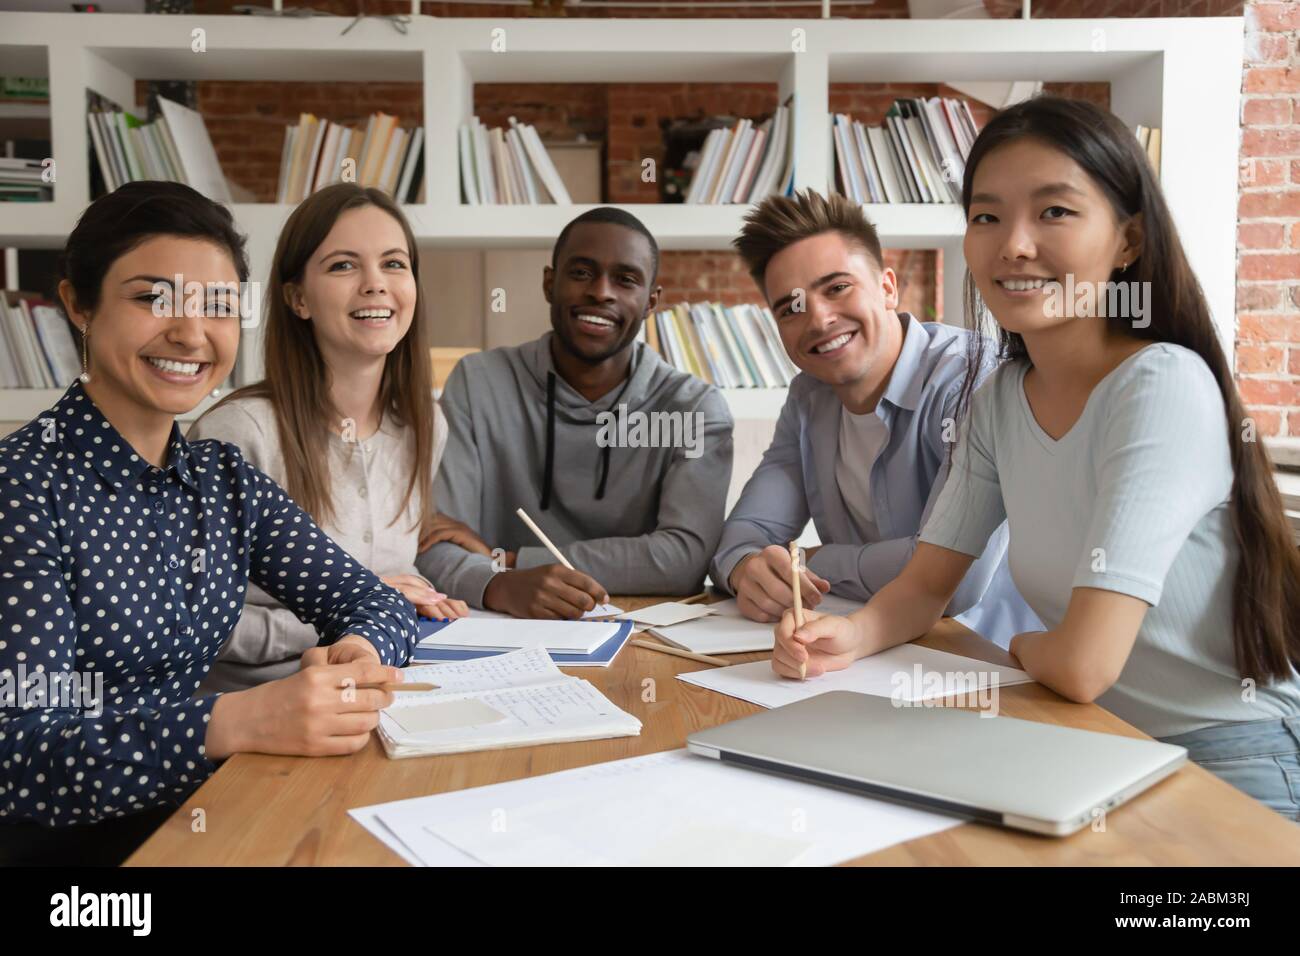 Happy mixed race students gathered in classroom, looking at camera. Stock Photo